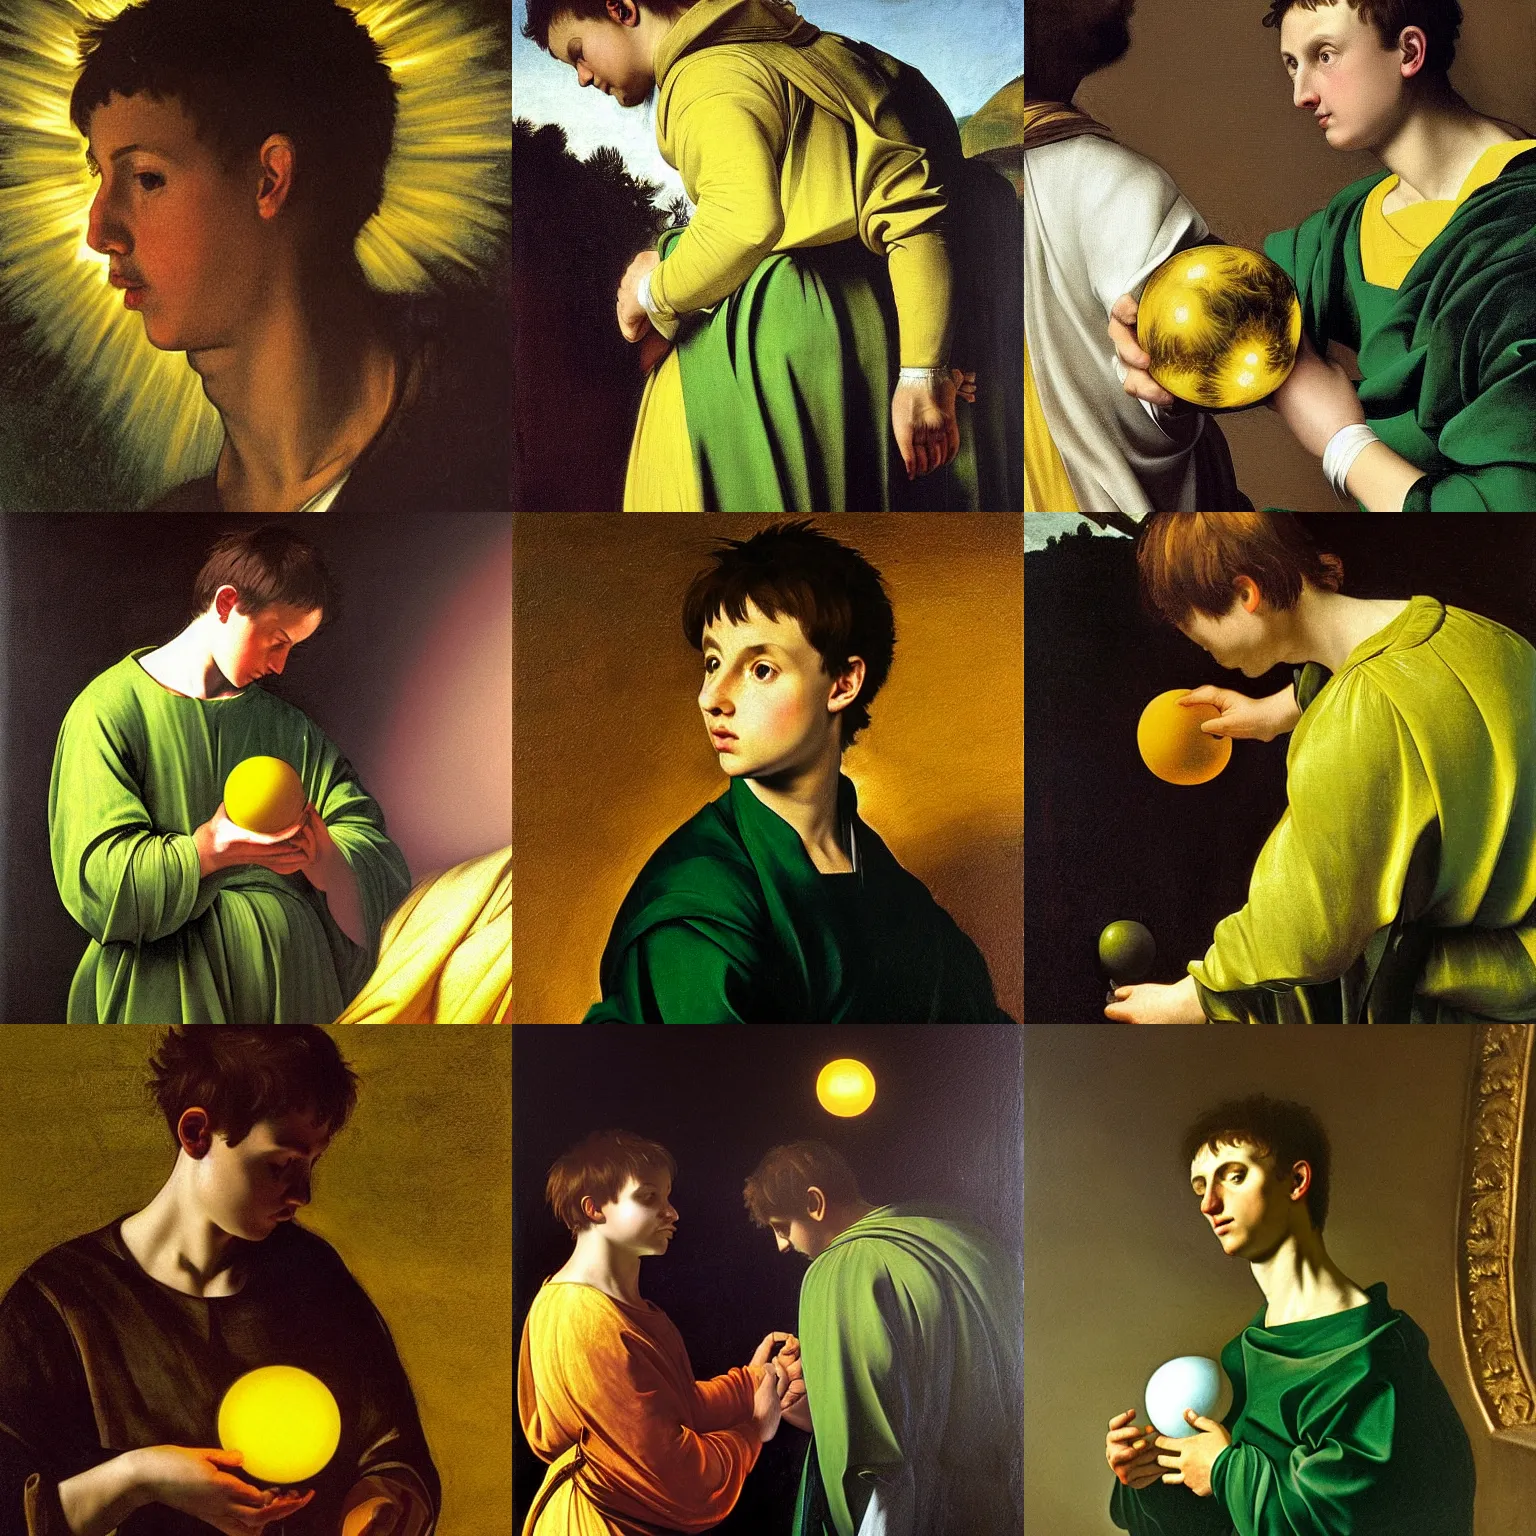 Prompt: Mason Mount wearing green tunic holding a yellow glowing orb. Painted by Caravaggio high detail